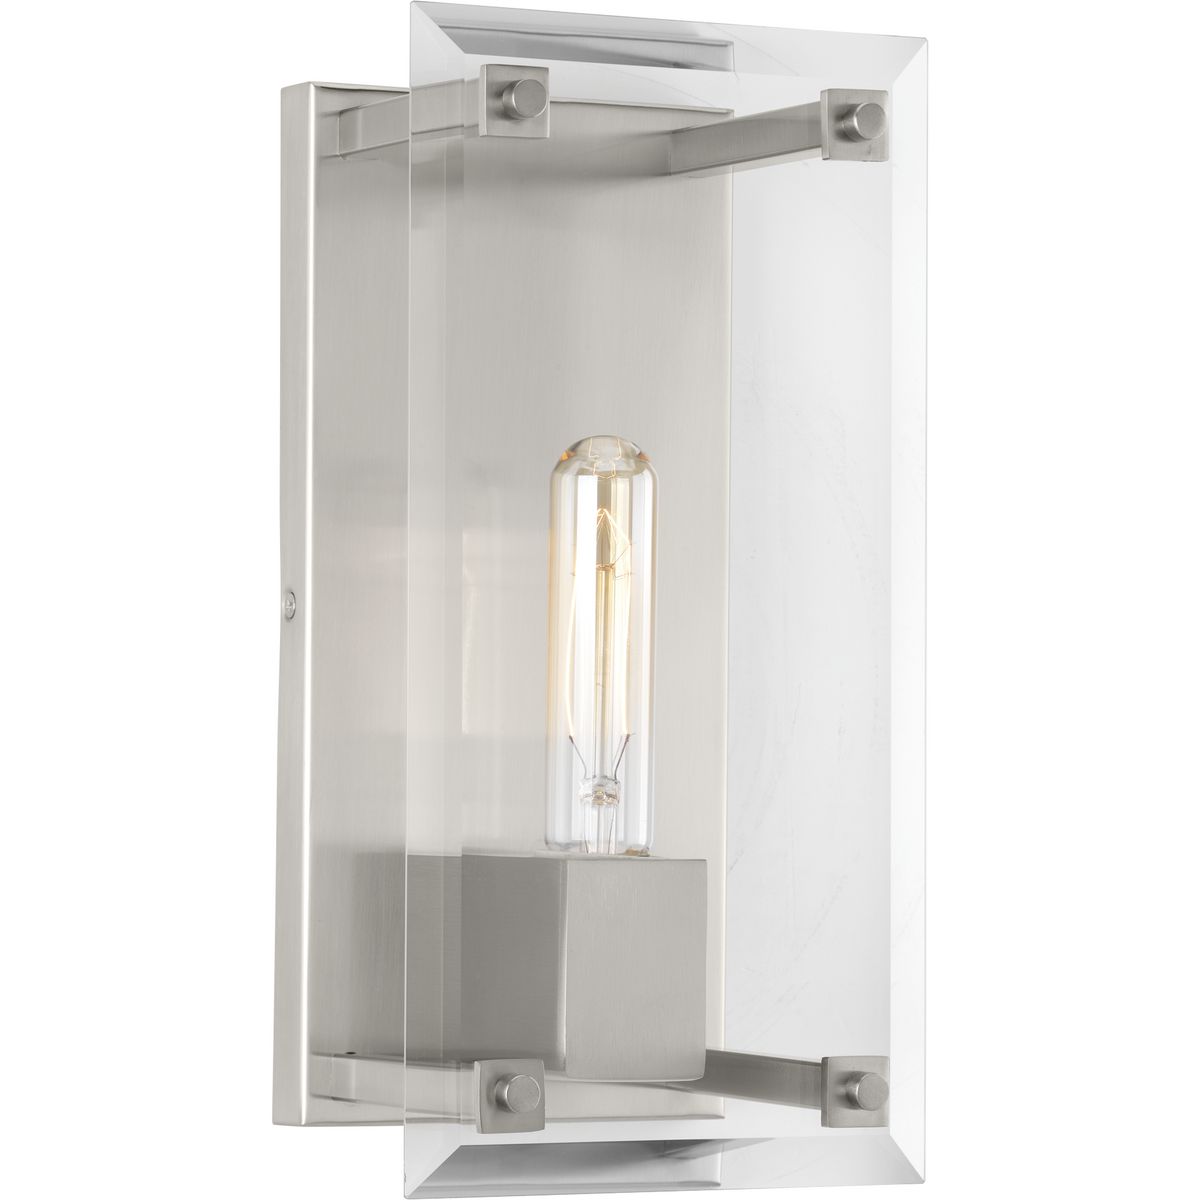 PROGRESS LIGHTING P710017-009 Brushed Nickel Hobbs Collection One-Light Wall Sconce